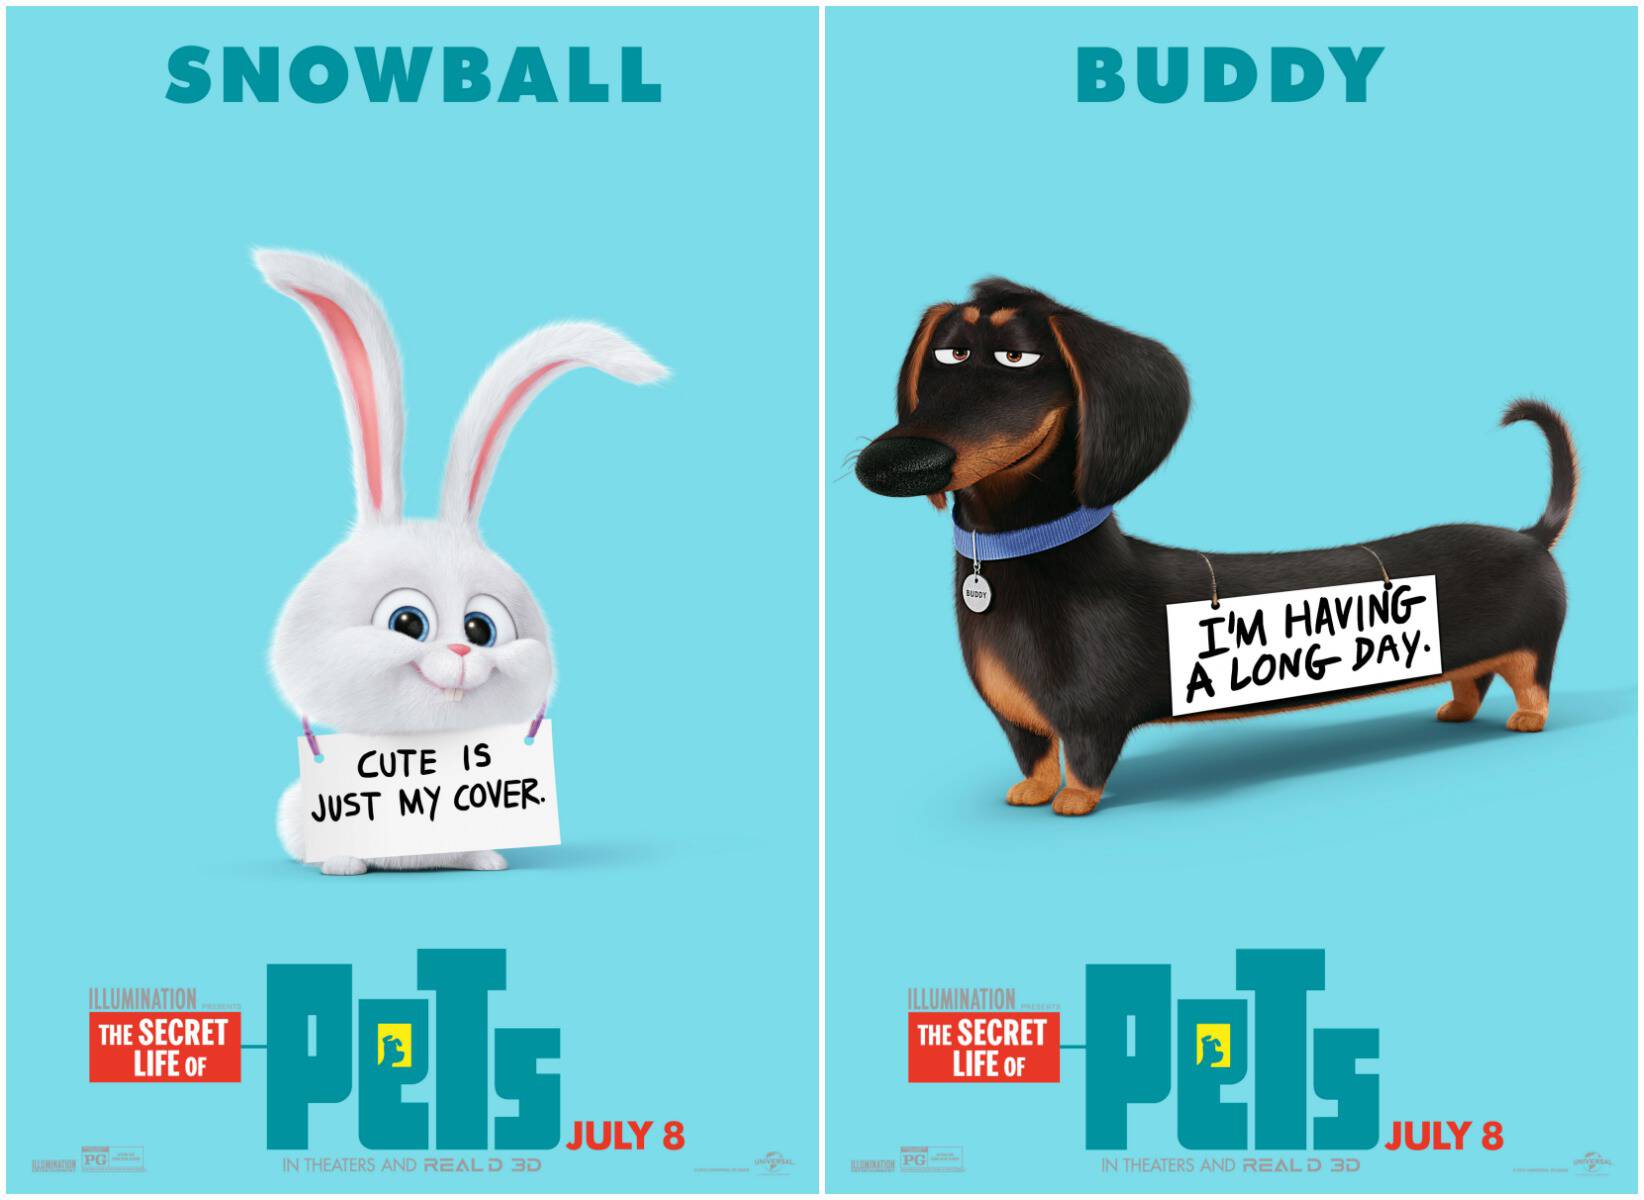 This movie looks hilarious! Get a first look at it in the new THE SECRET LIFE OF PETS trailer! Pet owners, you'll crack up! Coming July 8, 2016.